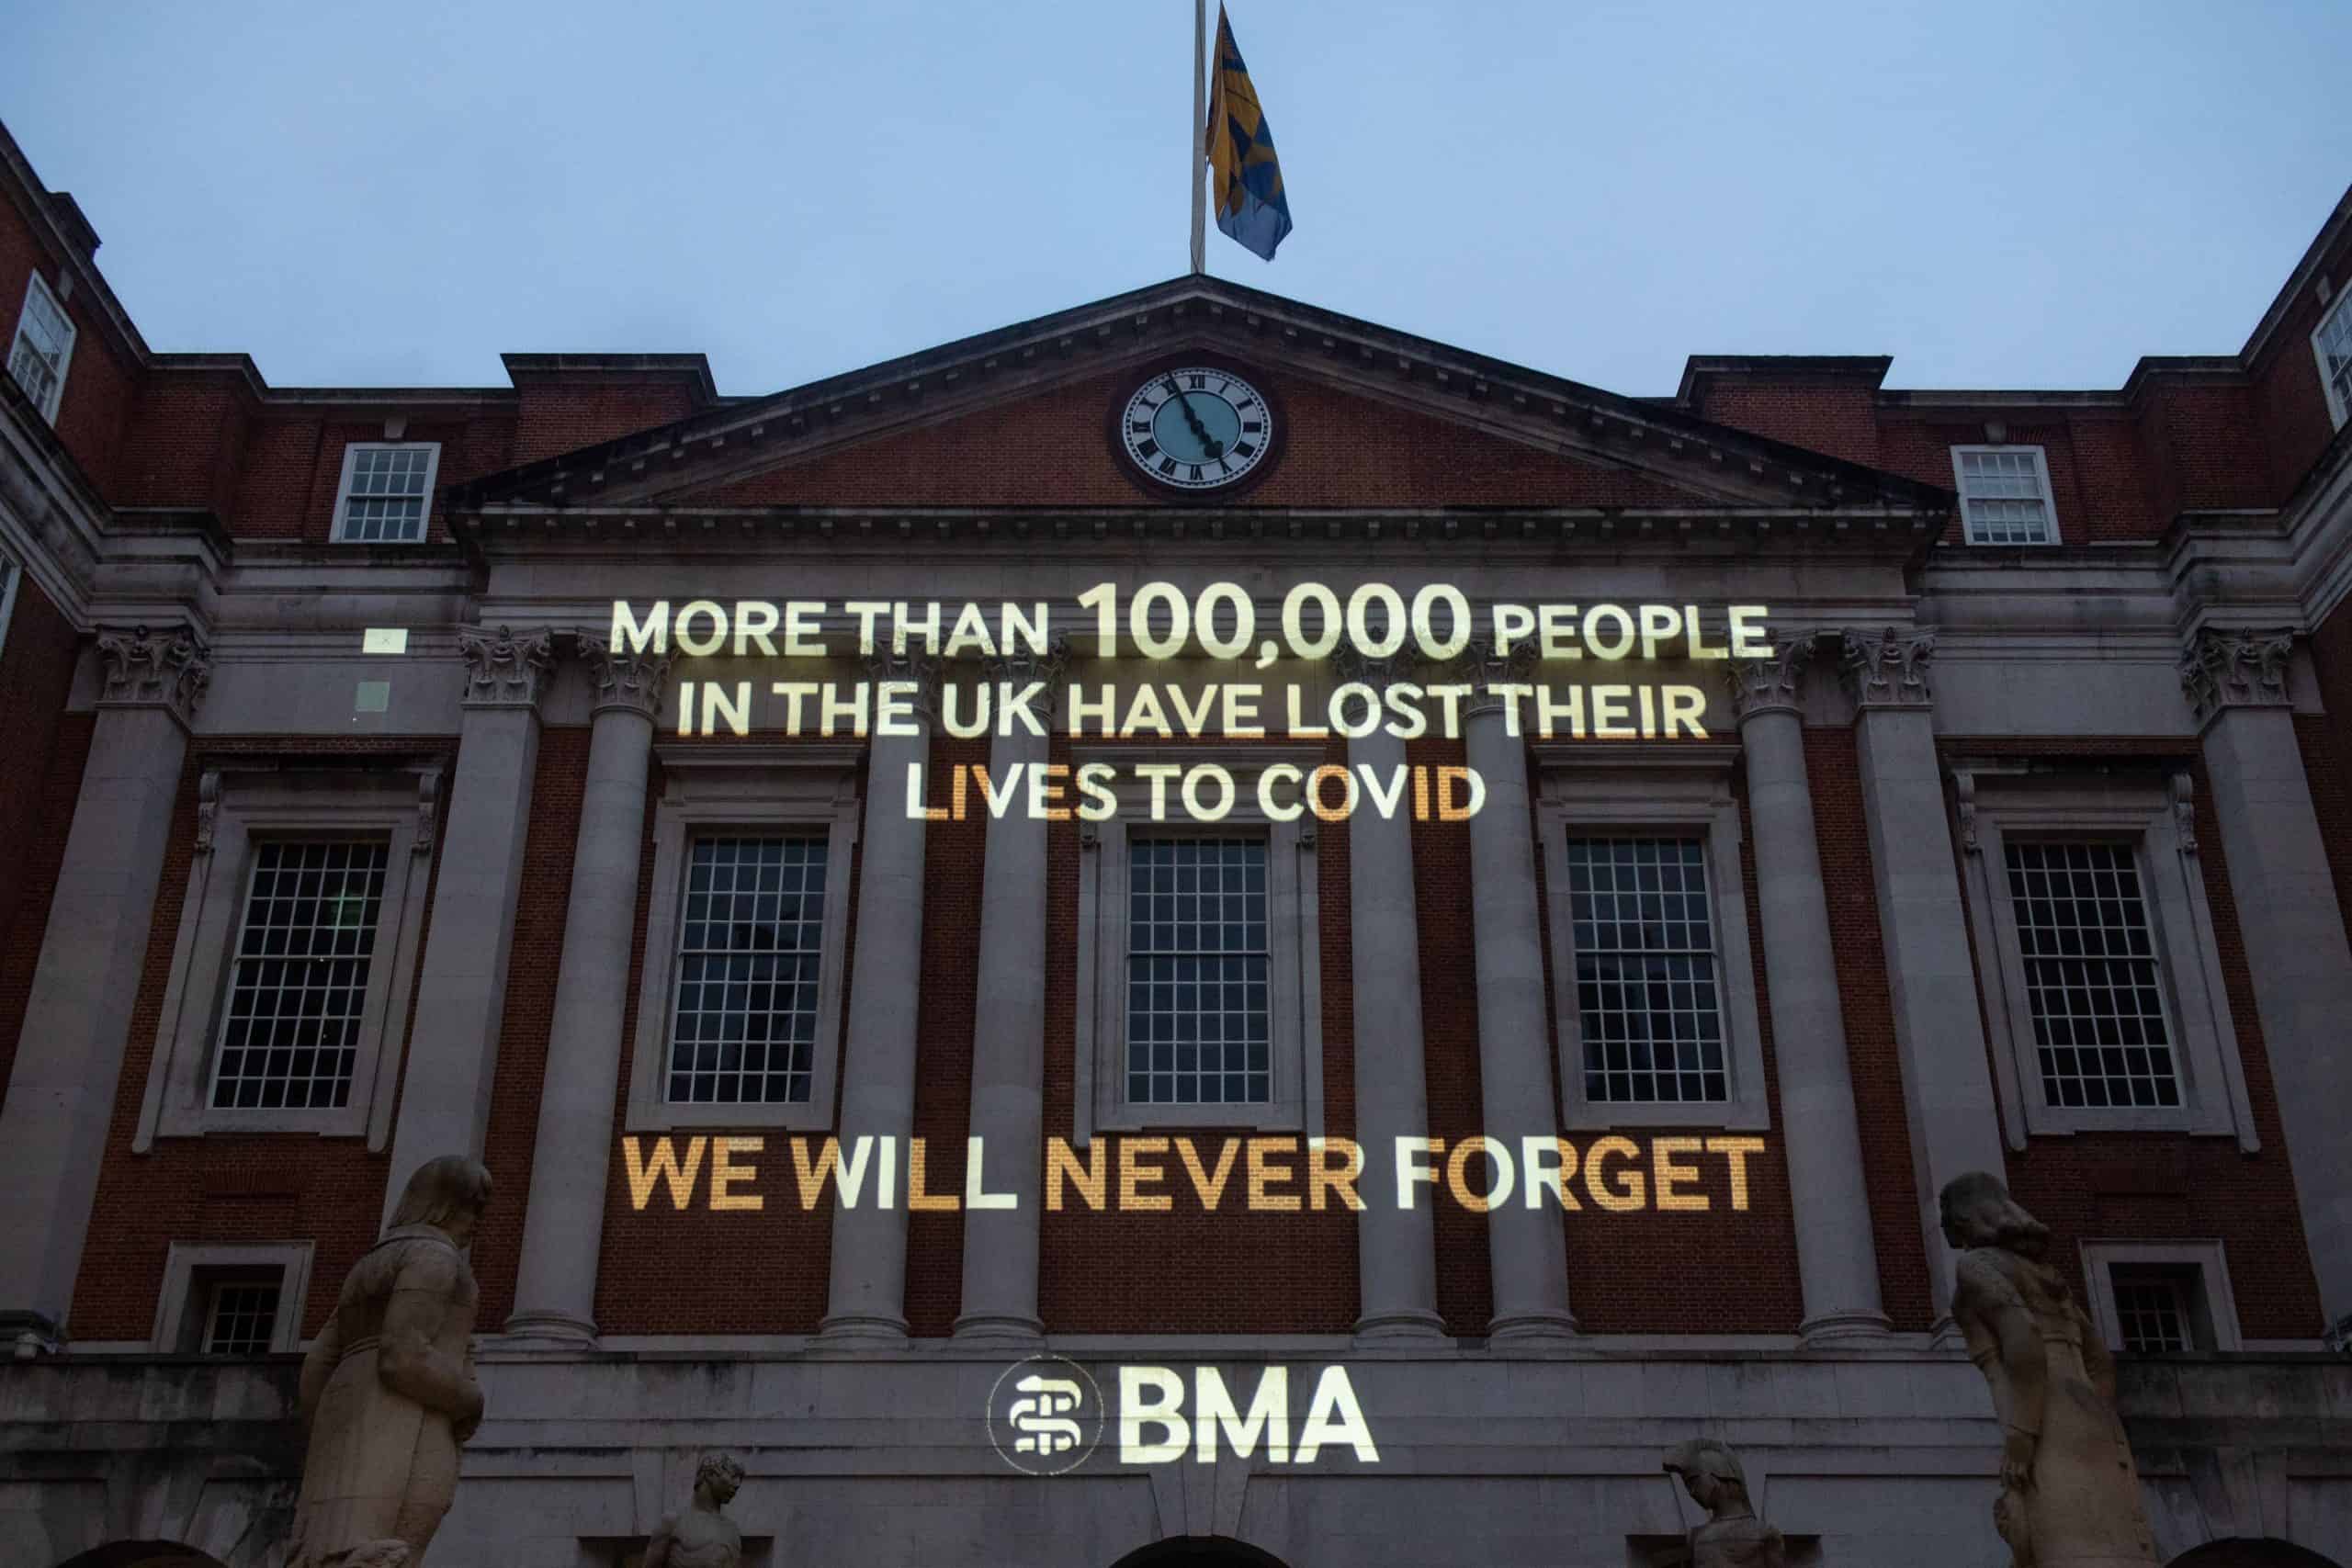 ‘We will not accept:’ BMA chairman slams neglect of NHS in heartfelt speech